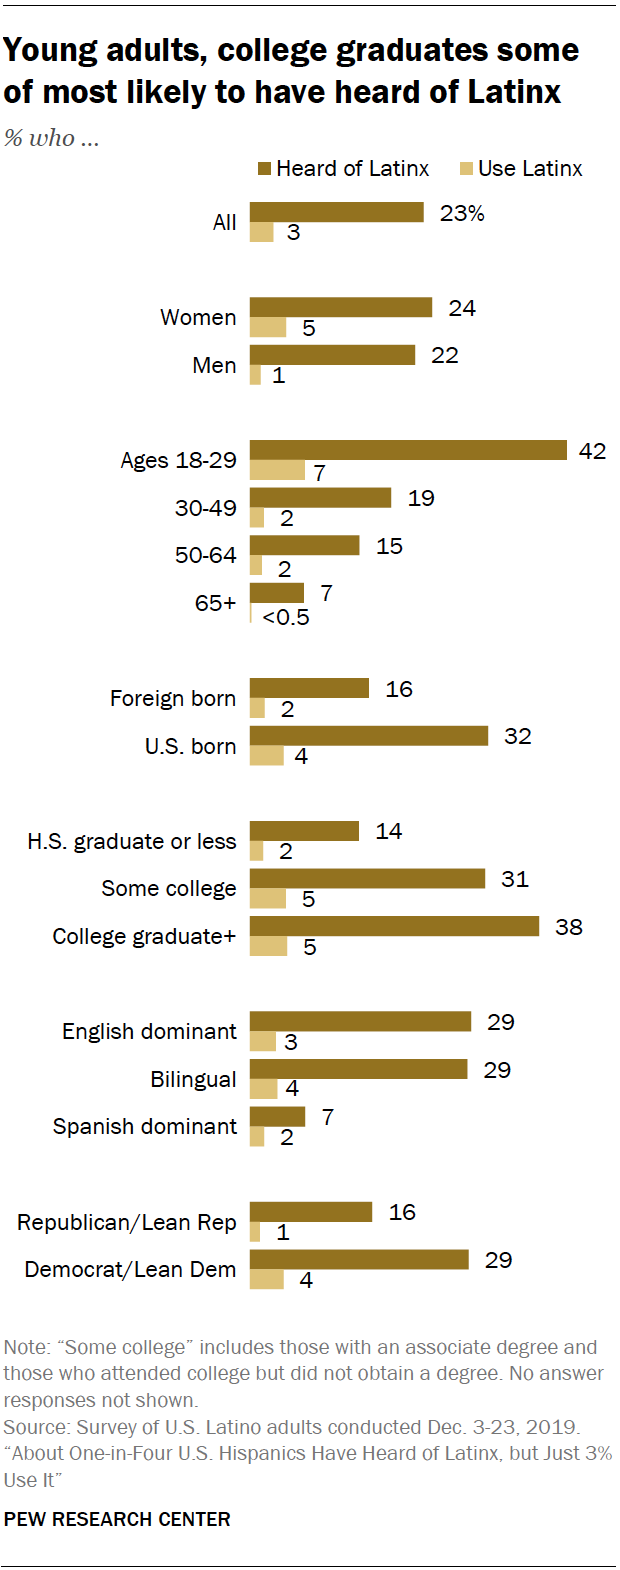 Young adults, college graduates some of most likely to have heard of Latinx